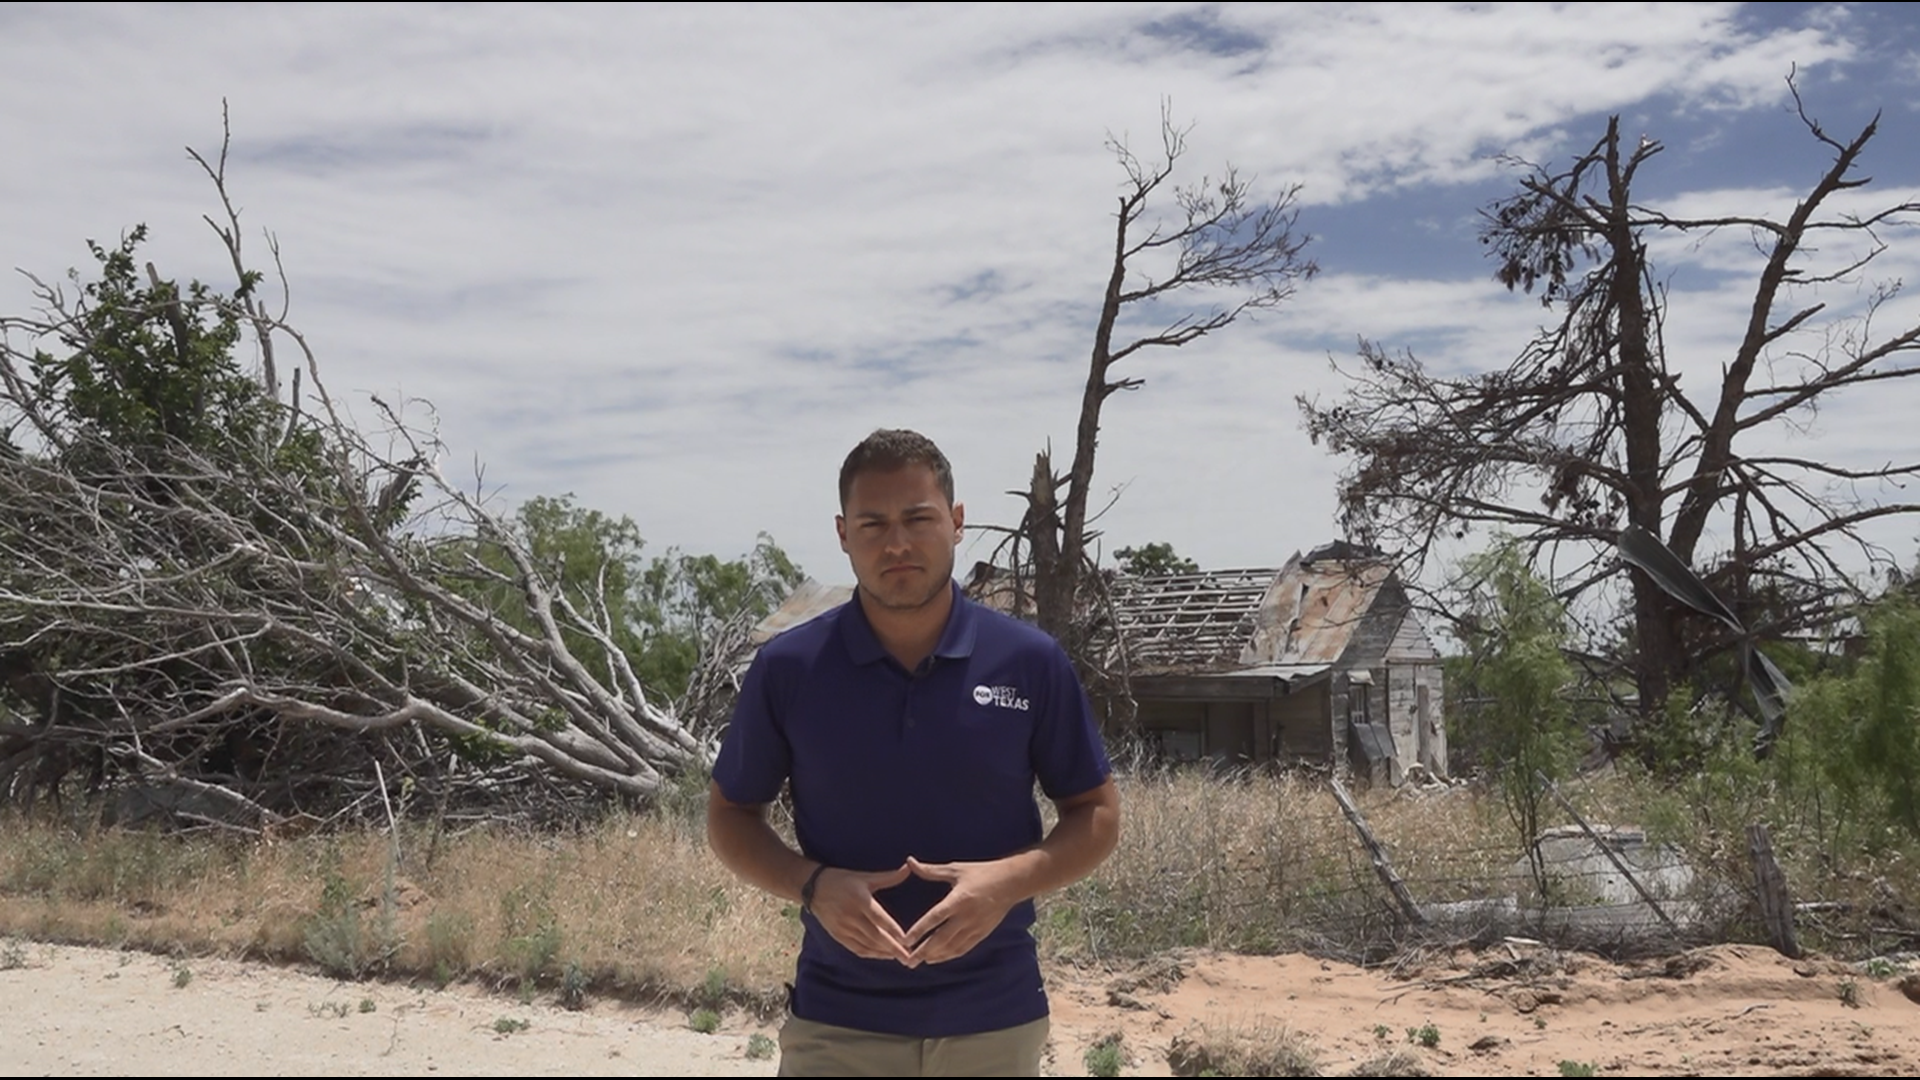 May 18th, 2020 marks one year after an EF-3 tornado tore through Ballinger, TX. Meteorologist Joe DeCarlo takes a look back at that day and the recovery efforts.